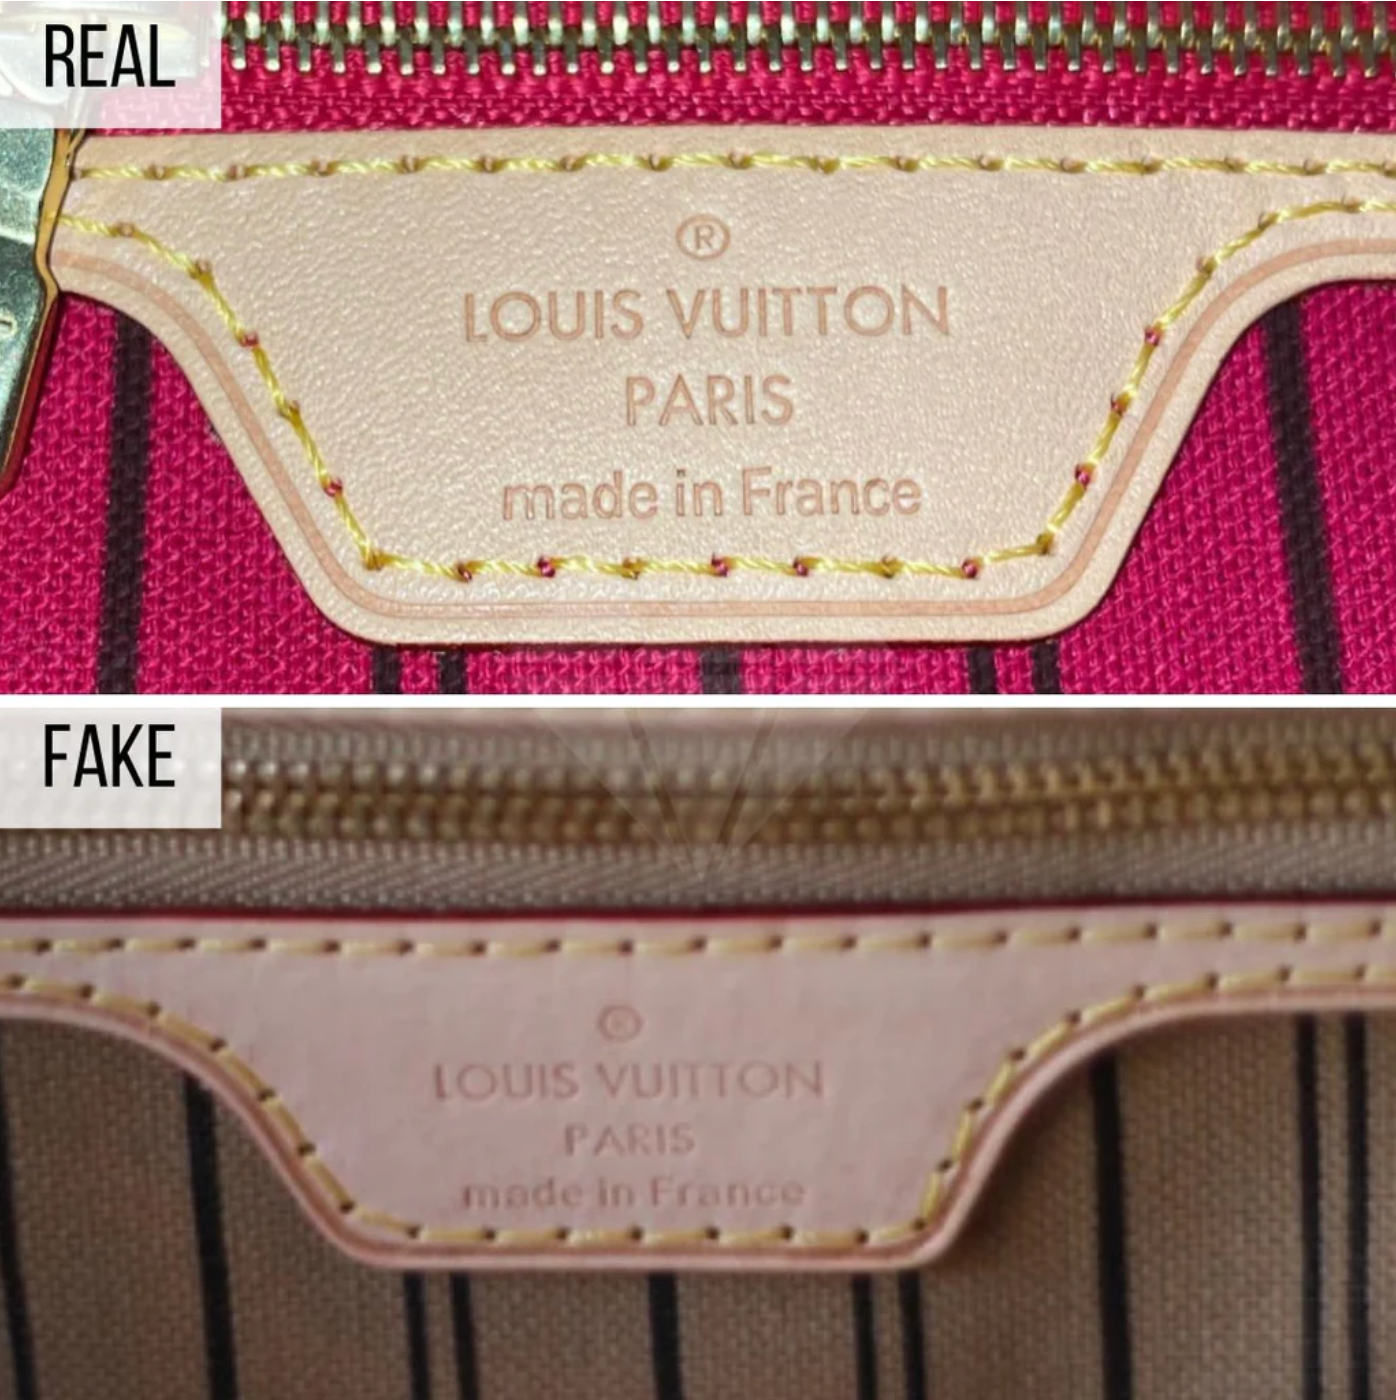 How to spot FAKE louis vuitton handbags  LV Favorite MM Dupe vs Real   YouTube